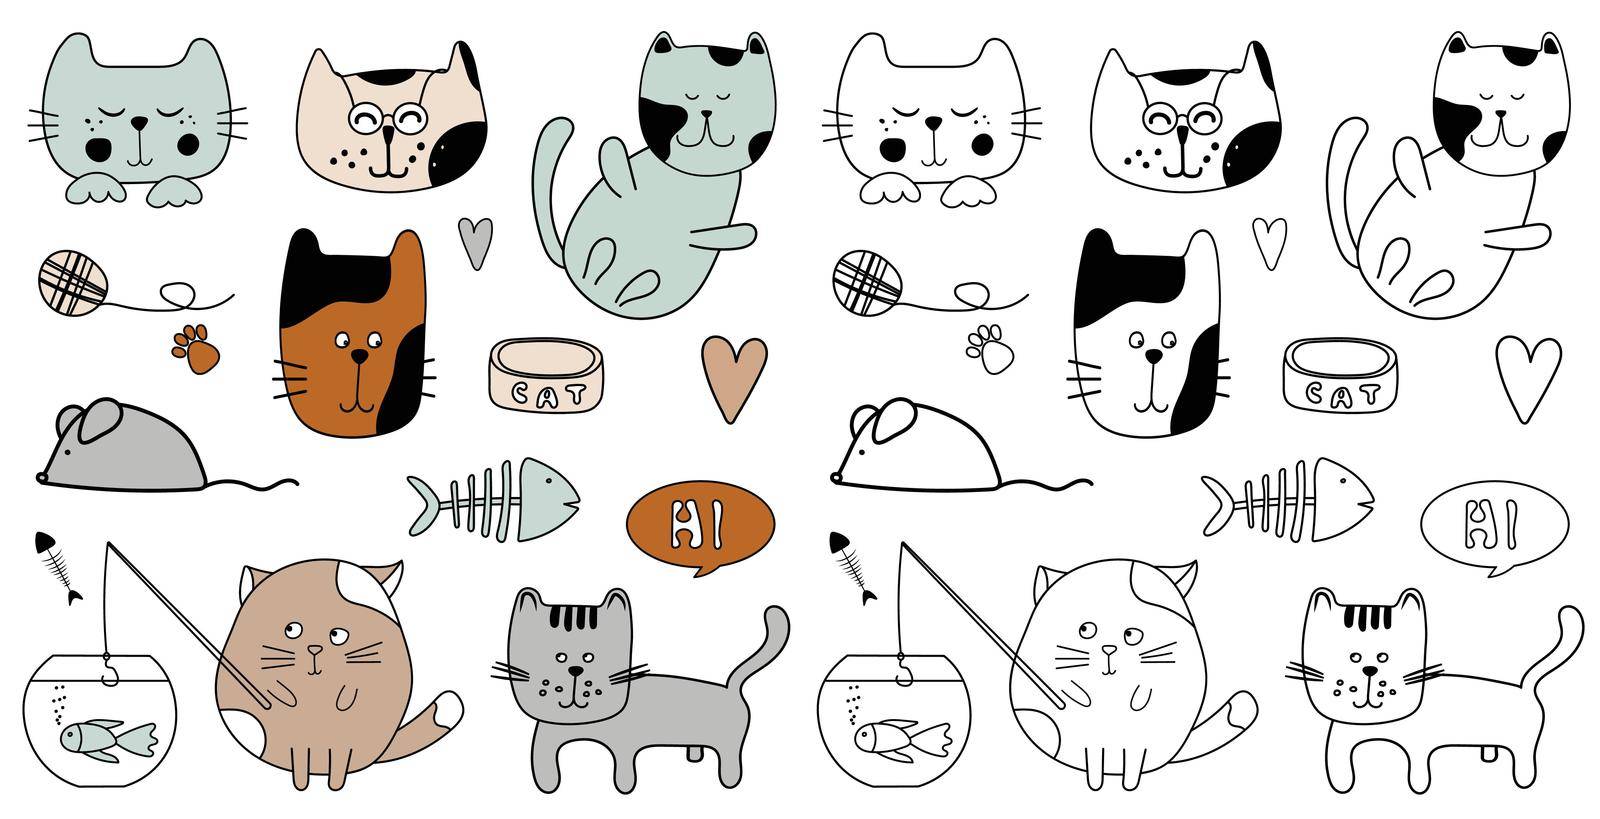 Cute kitty cats cartoon design set for coloring book for children. Collection of feline animals kitten drawings